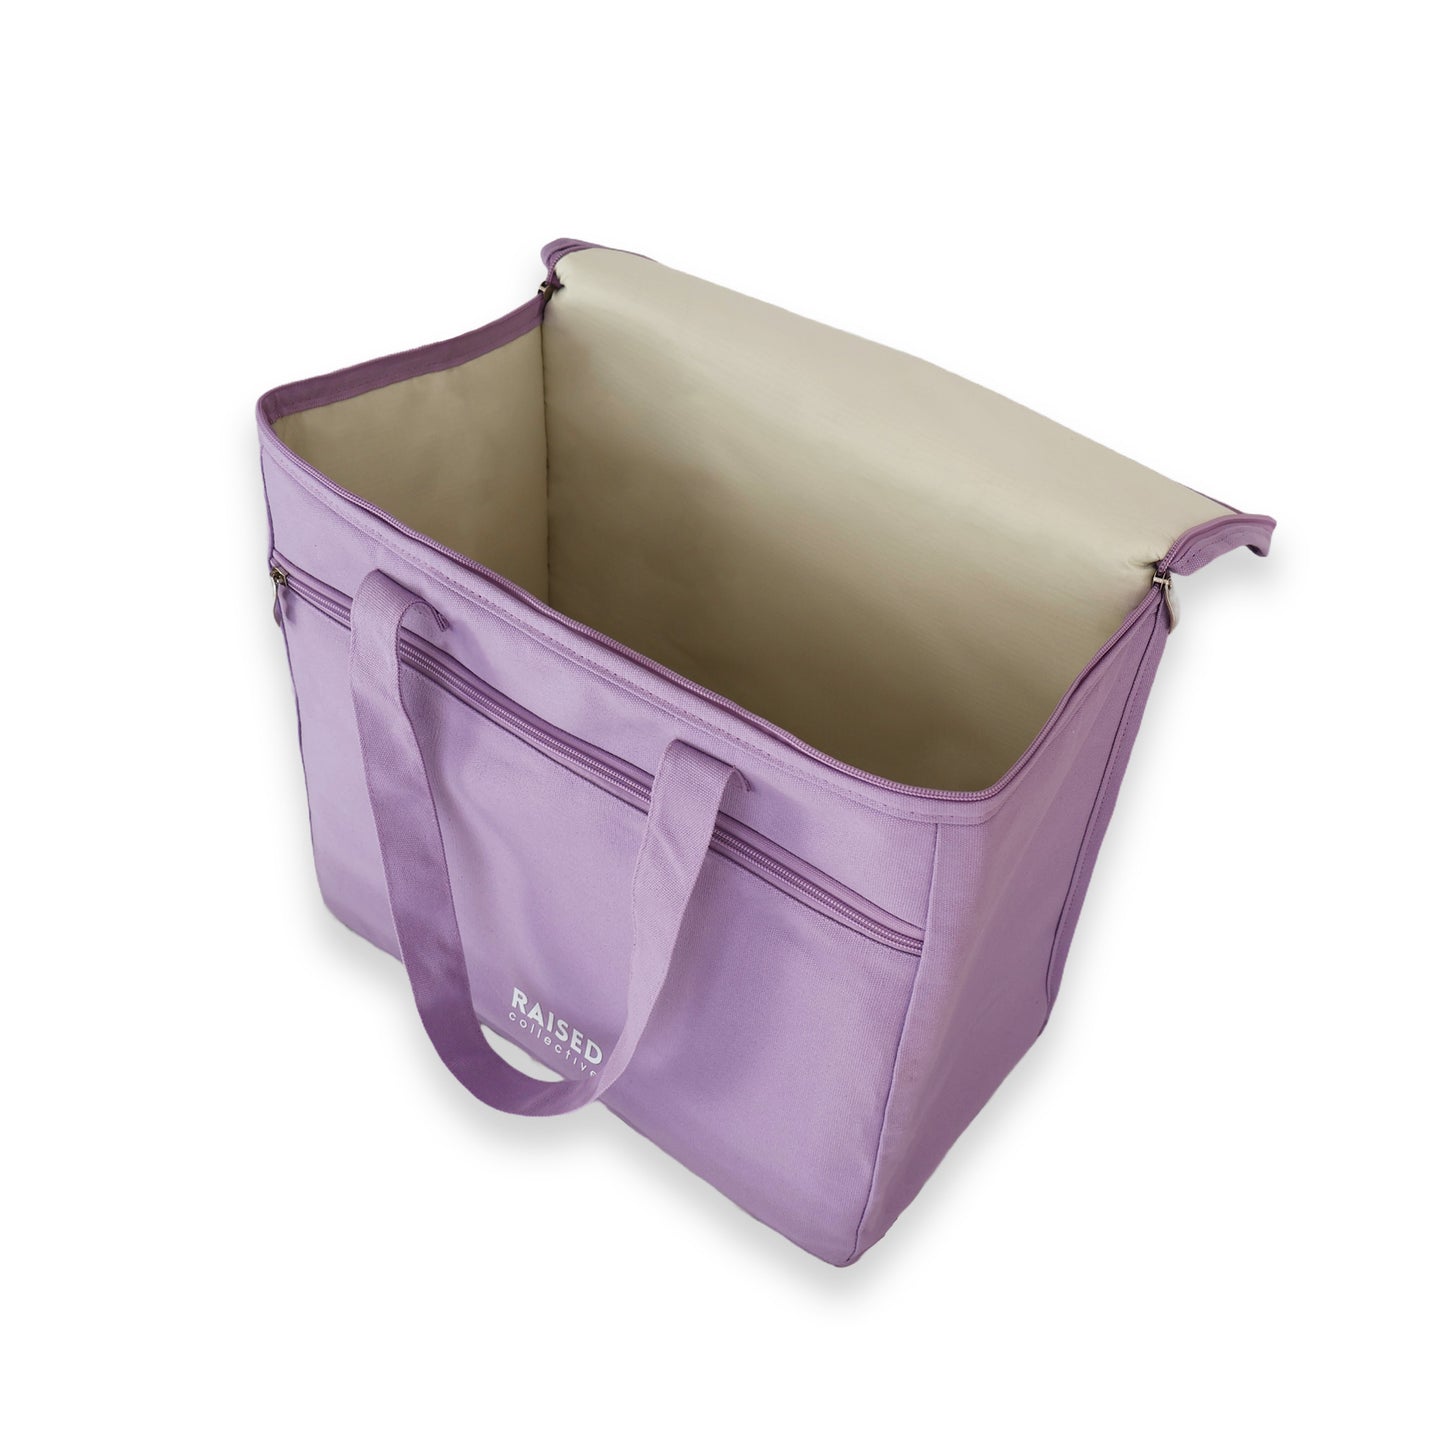 Inside view of the picnic cooler bag in lilac, large main insulated compartment and smaller front zippered compartment for keys, wallet and phone.  For beach and picnic days, buy well and buy once.